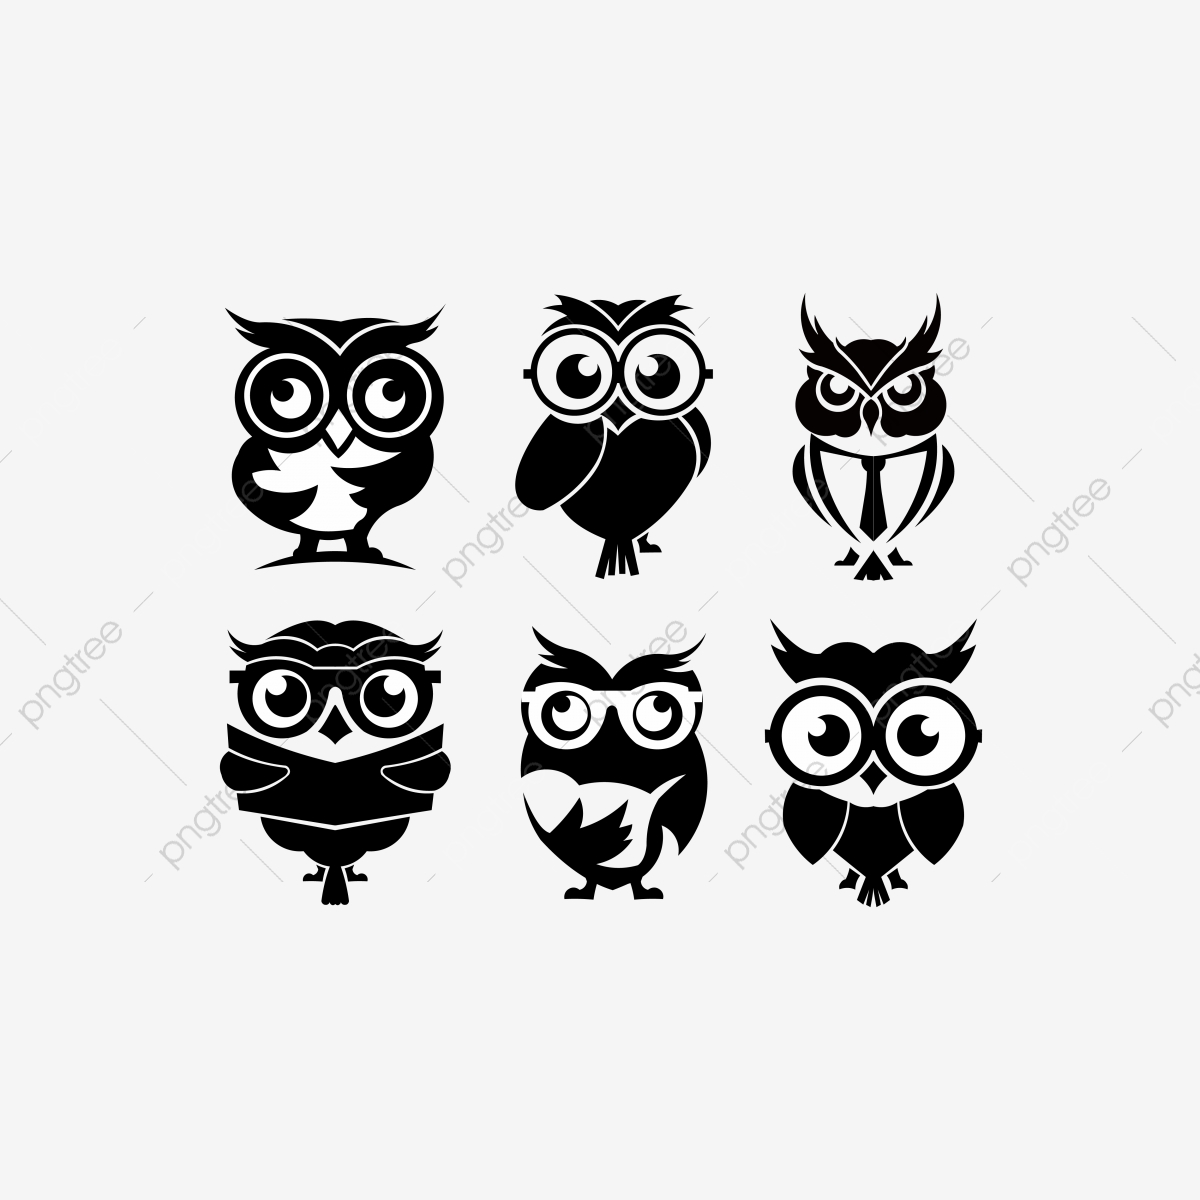 Owl Vector At Vectorified Com Collection Of Owl Vector Free For Personal Use